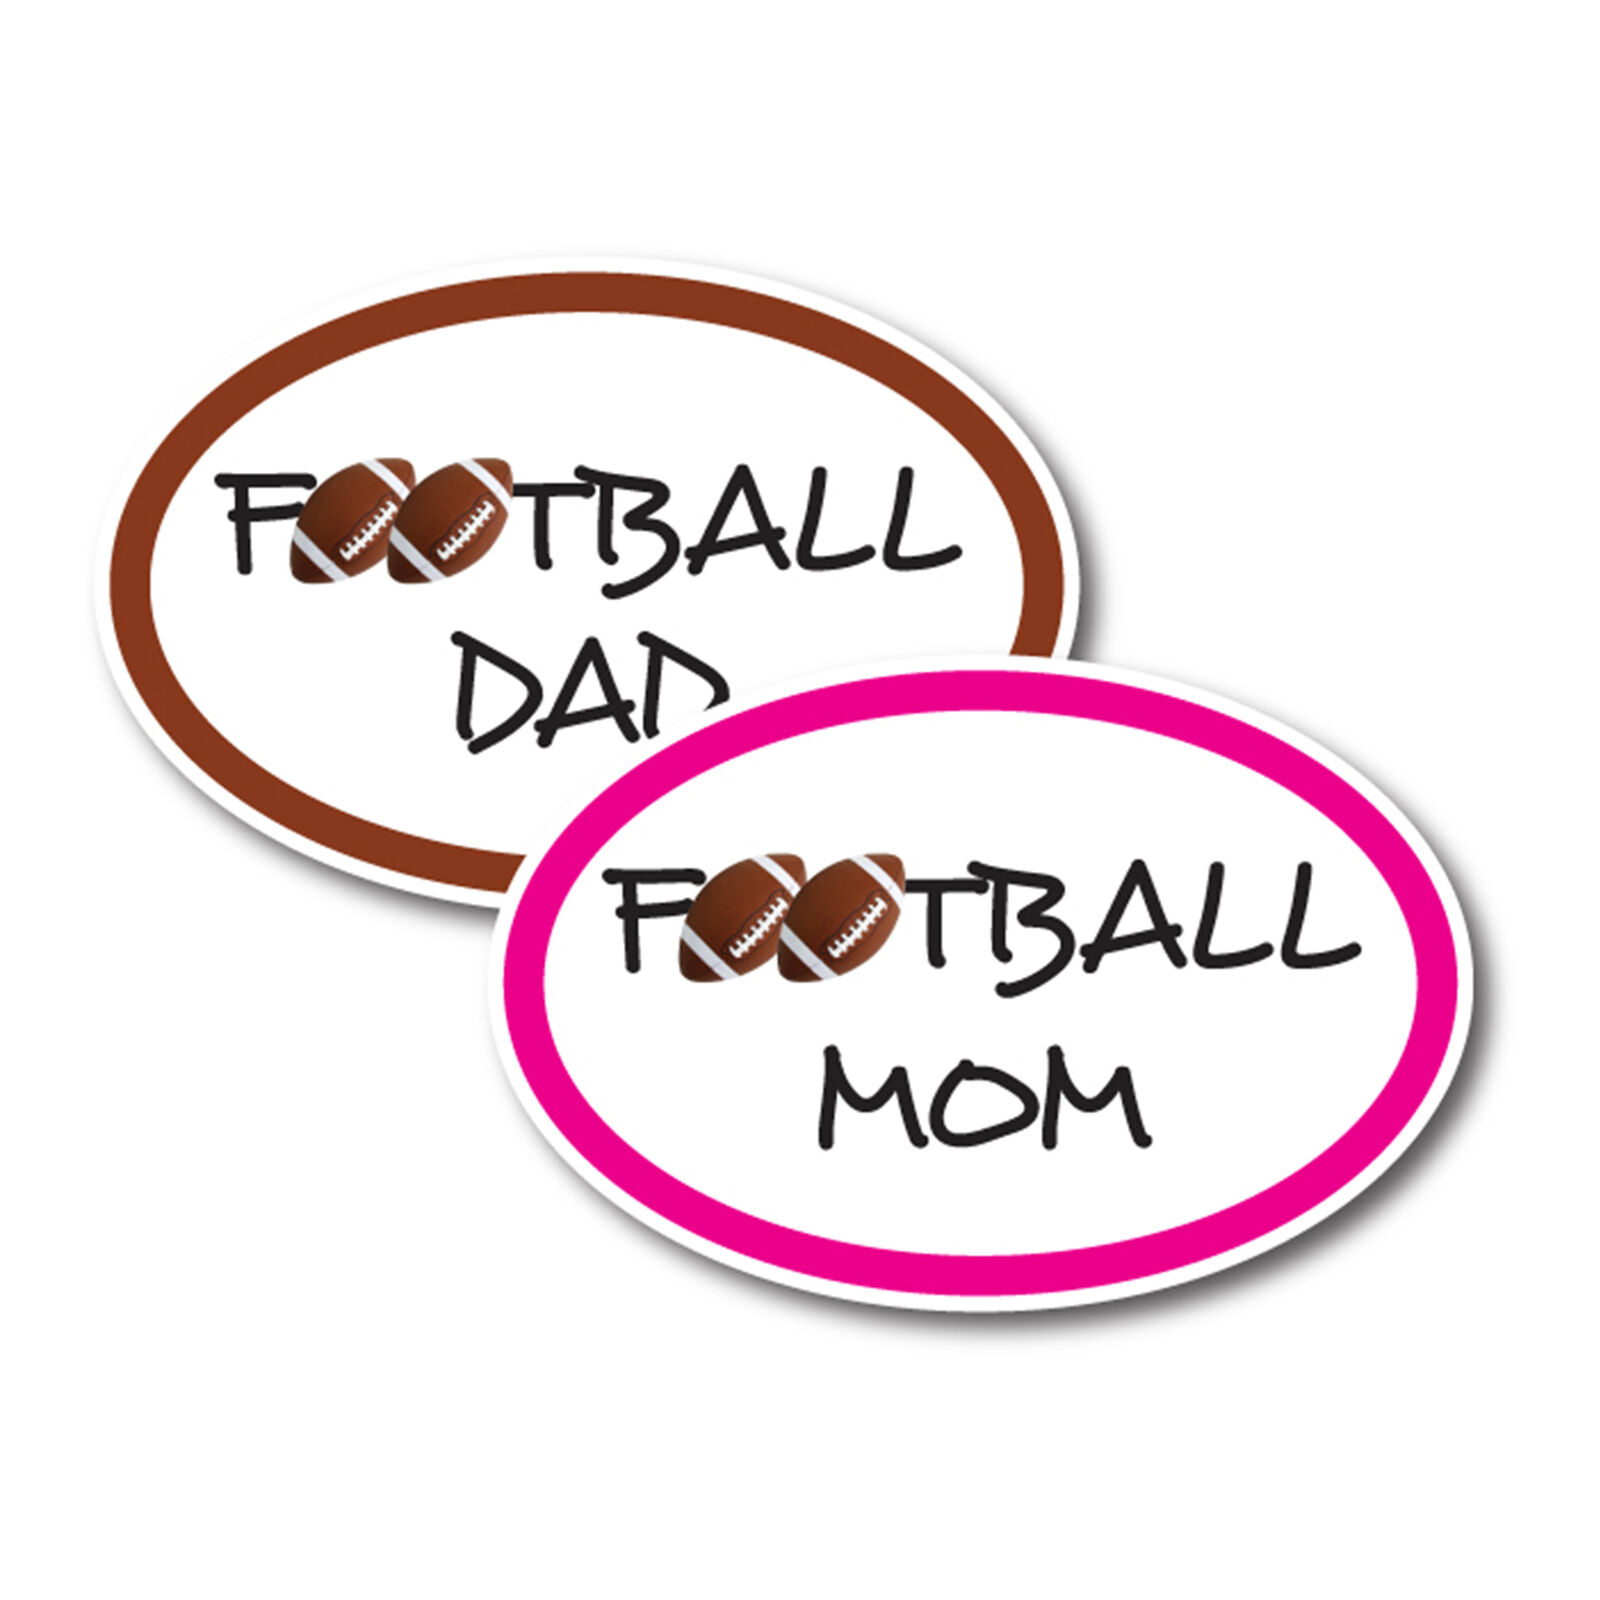 Football Mom and Football Dad Combo Pack Oval Magnet Decal, 4x6 Inches